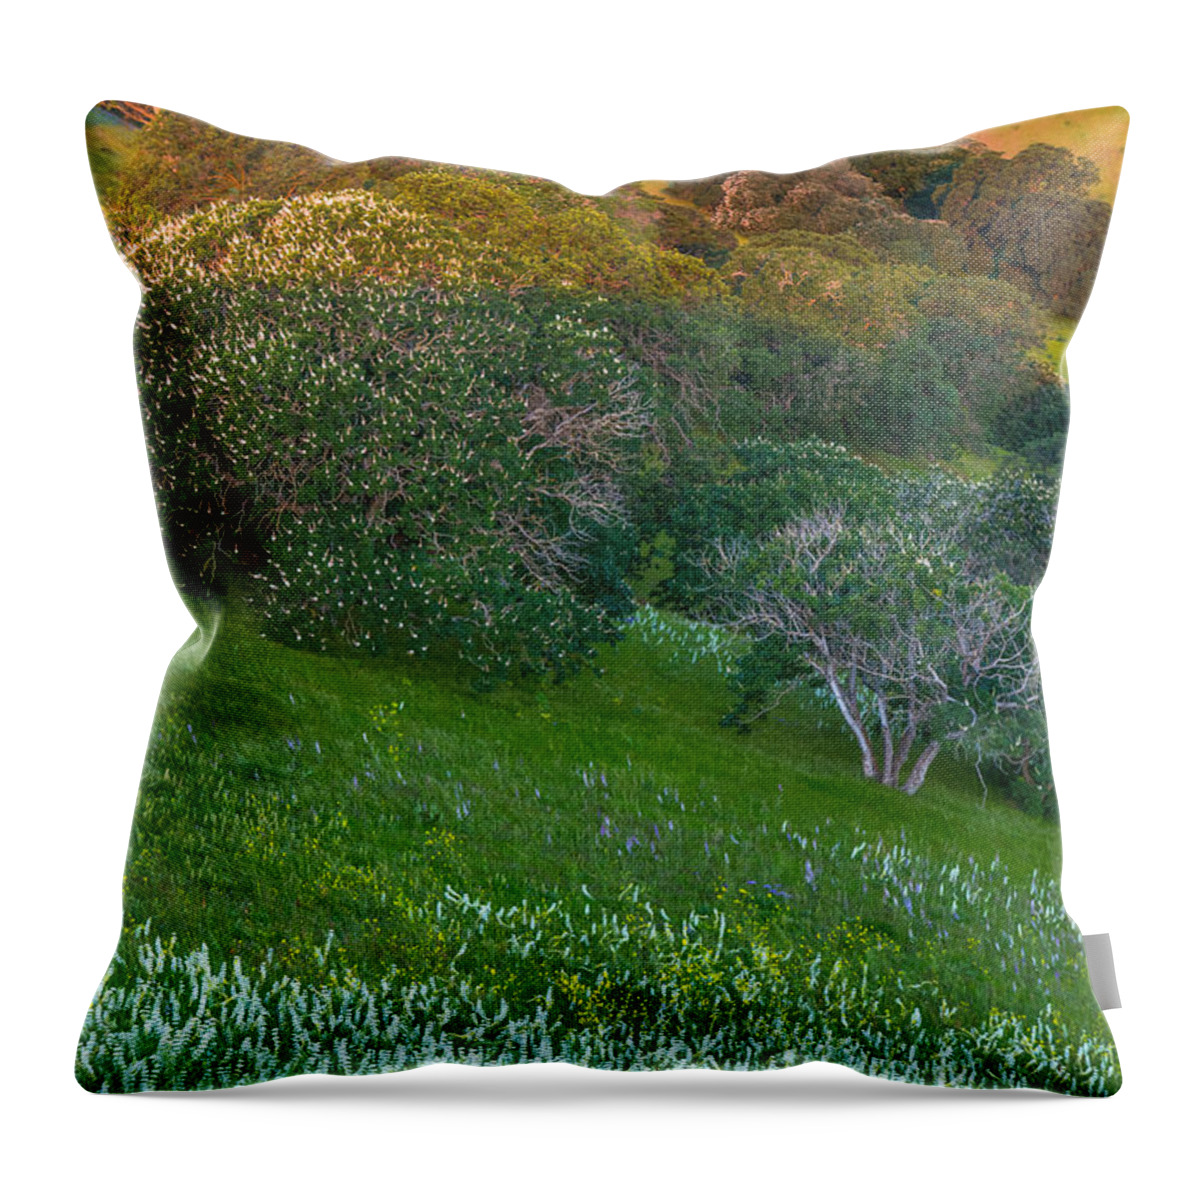 Landscape Throw Pillow featuring the photograph White Lupine and Buckeye by Marc Crumpler